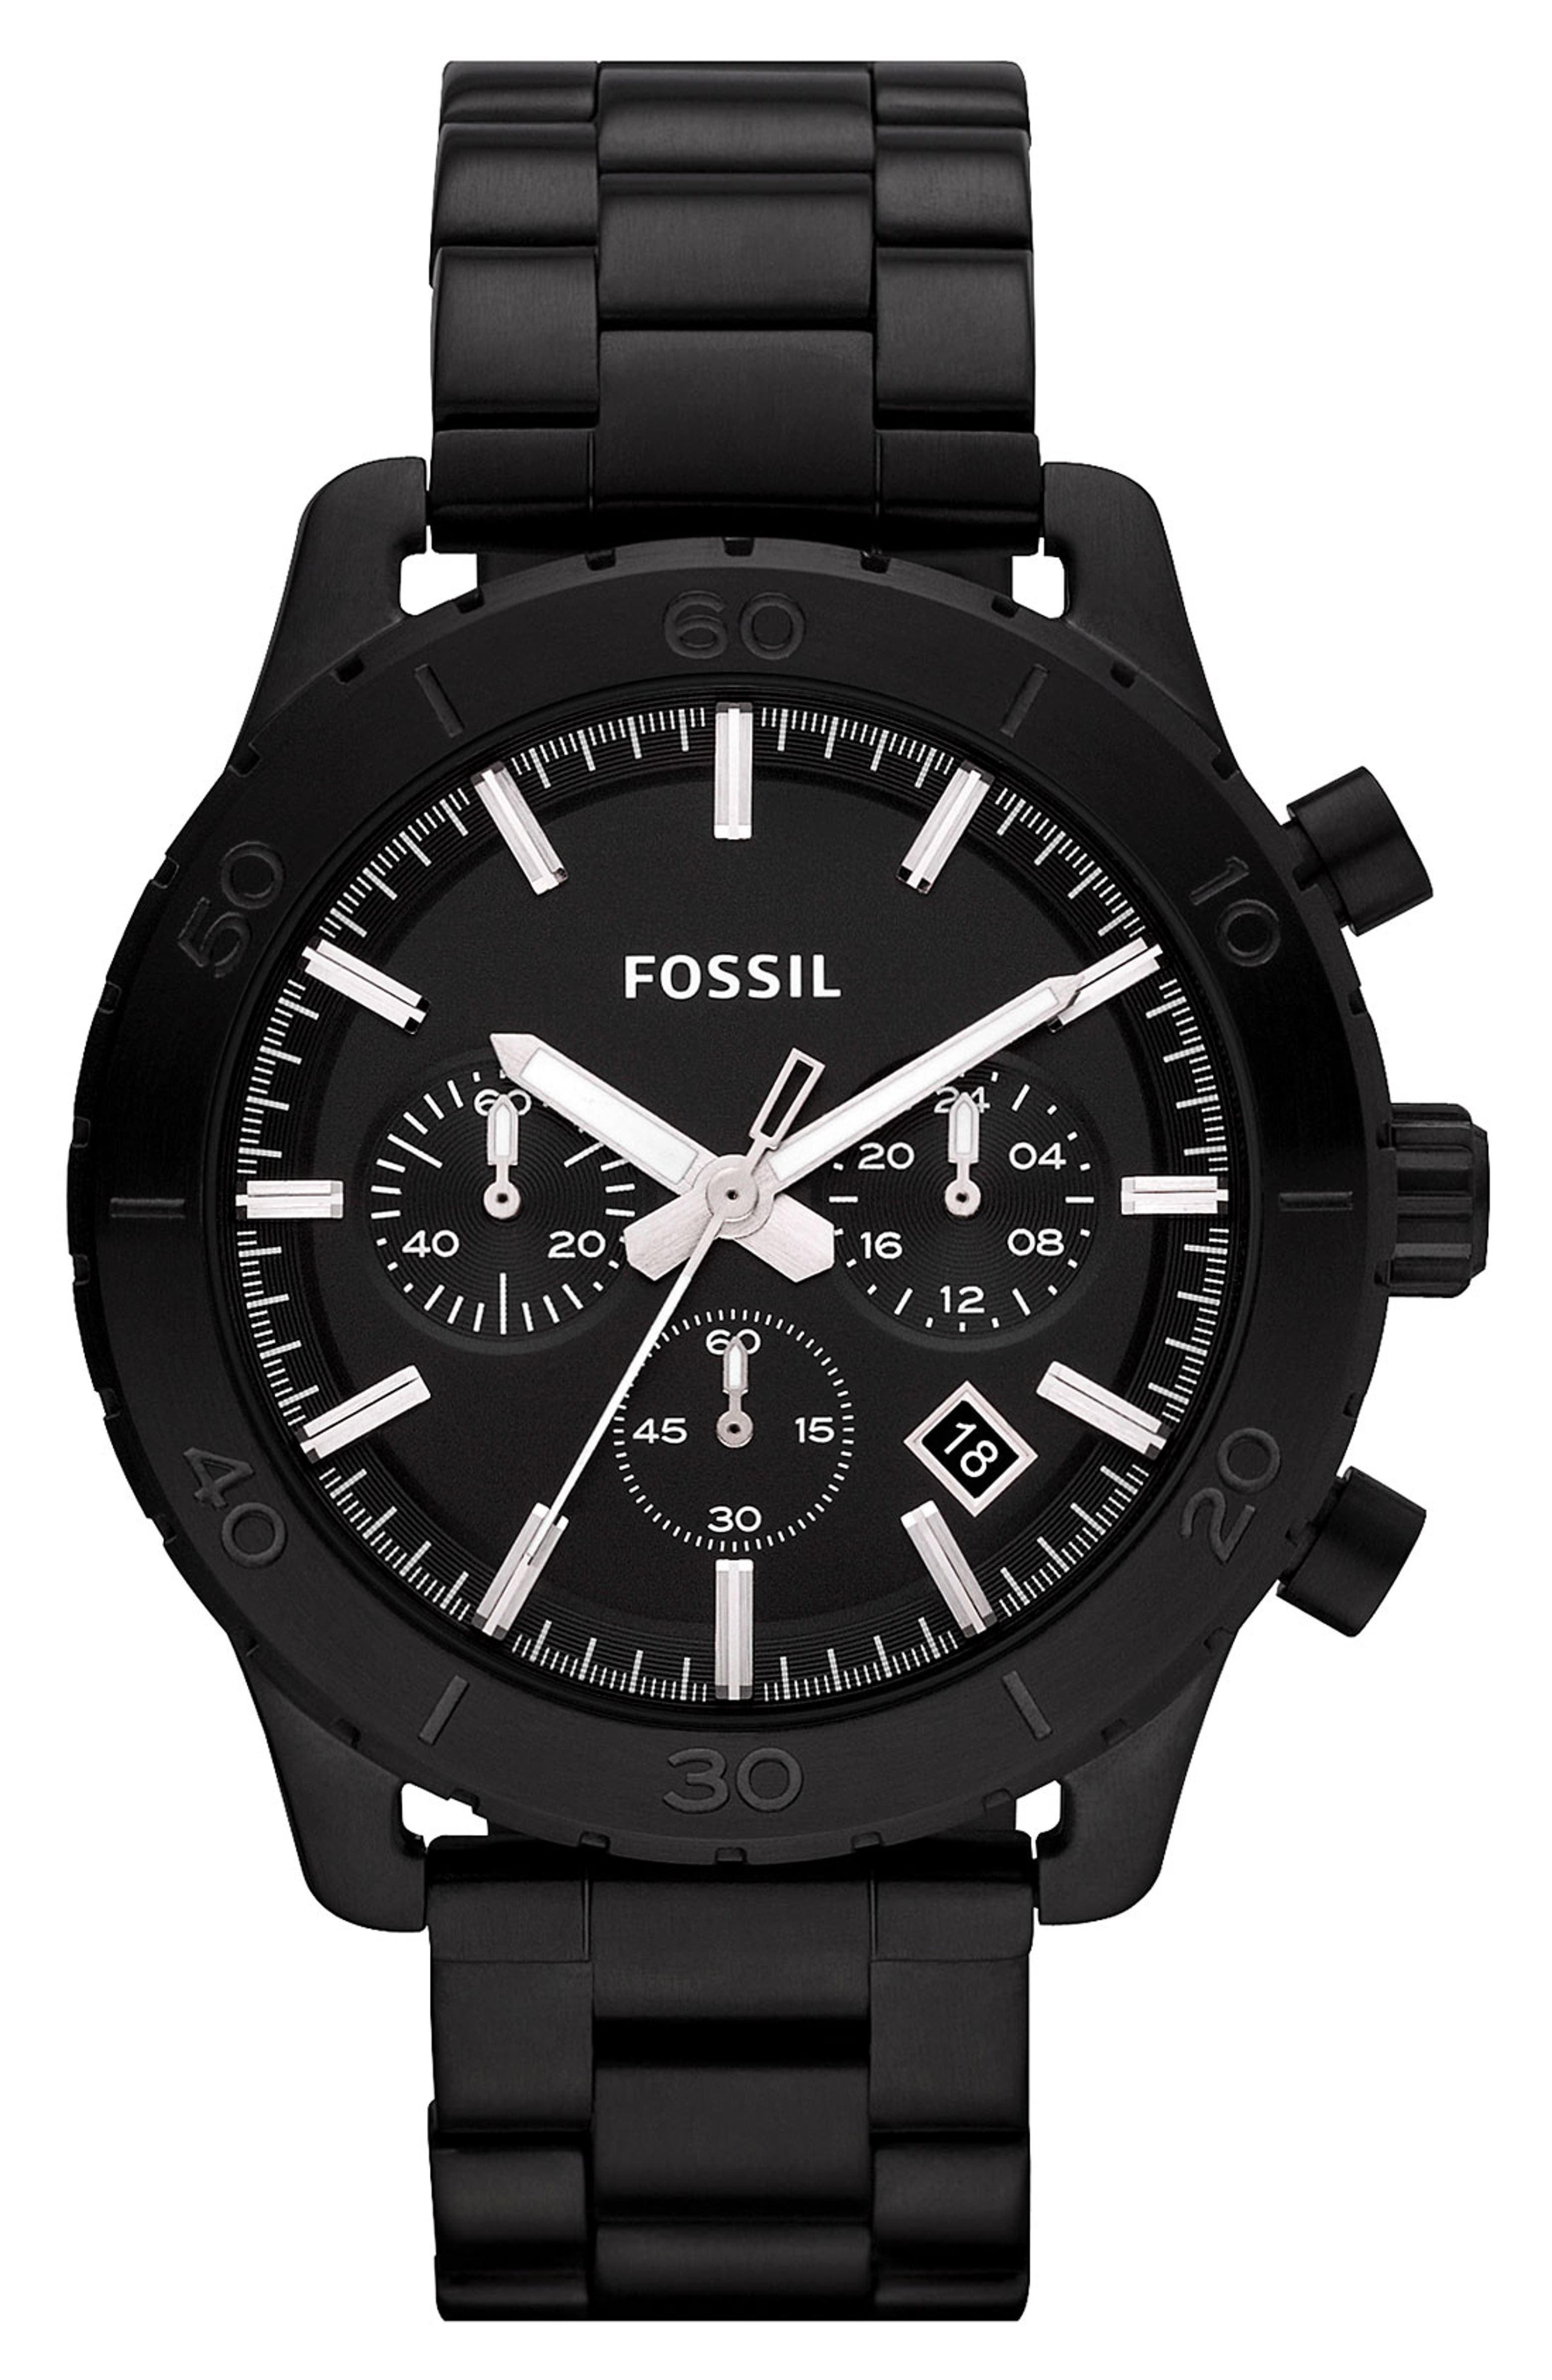 Fossil 'Keaton' Chronograph Watch | Nordstrom